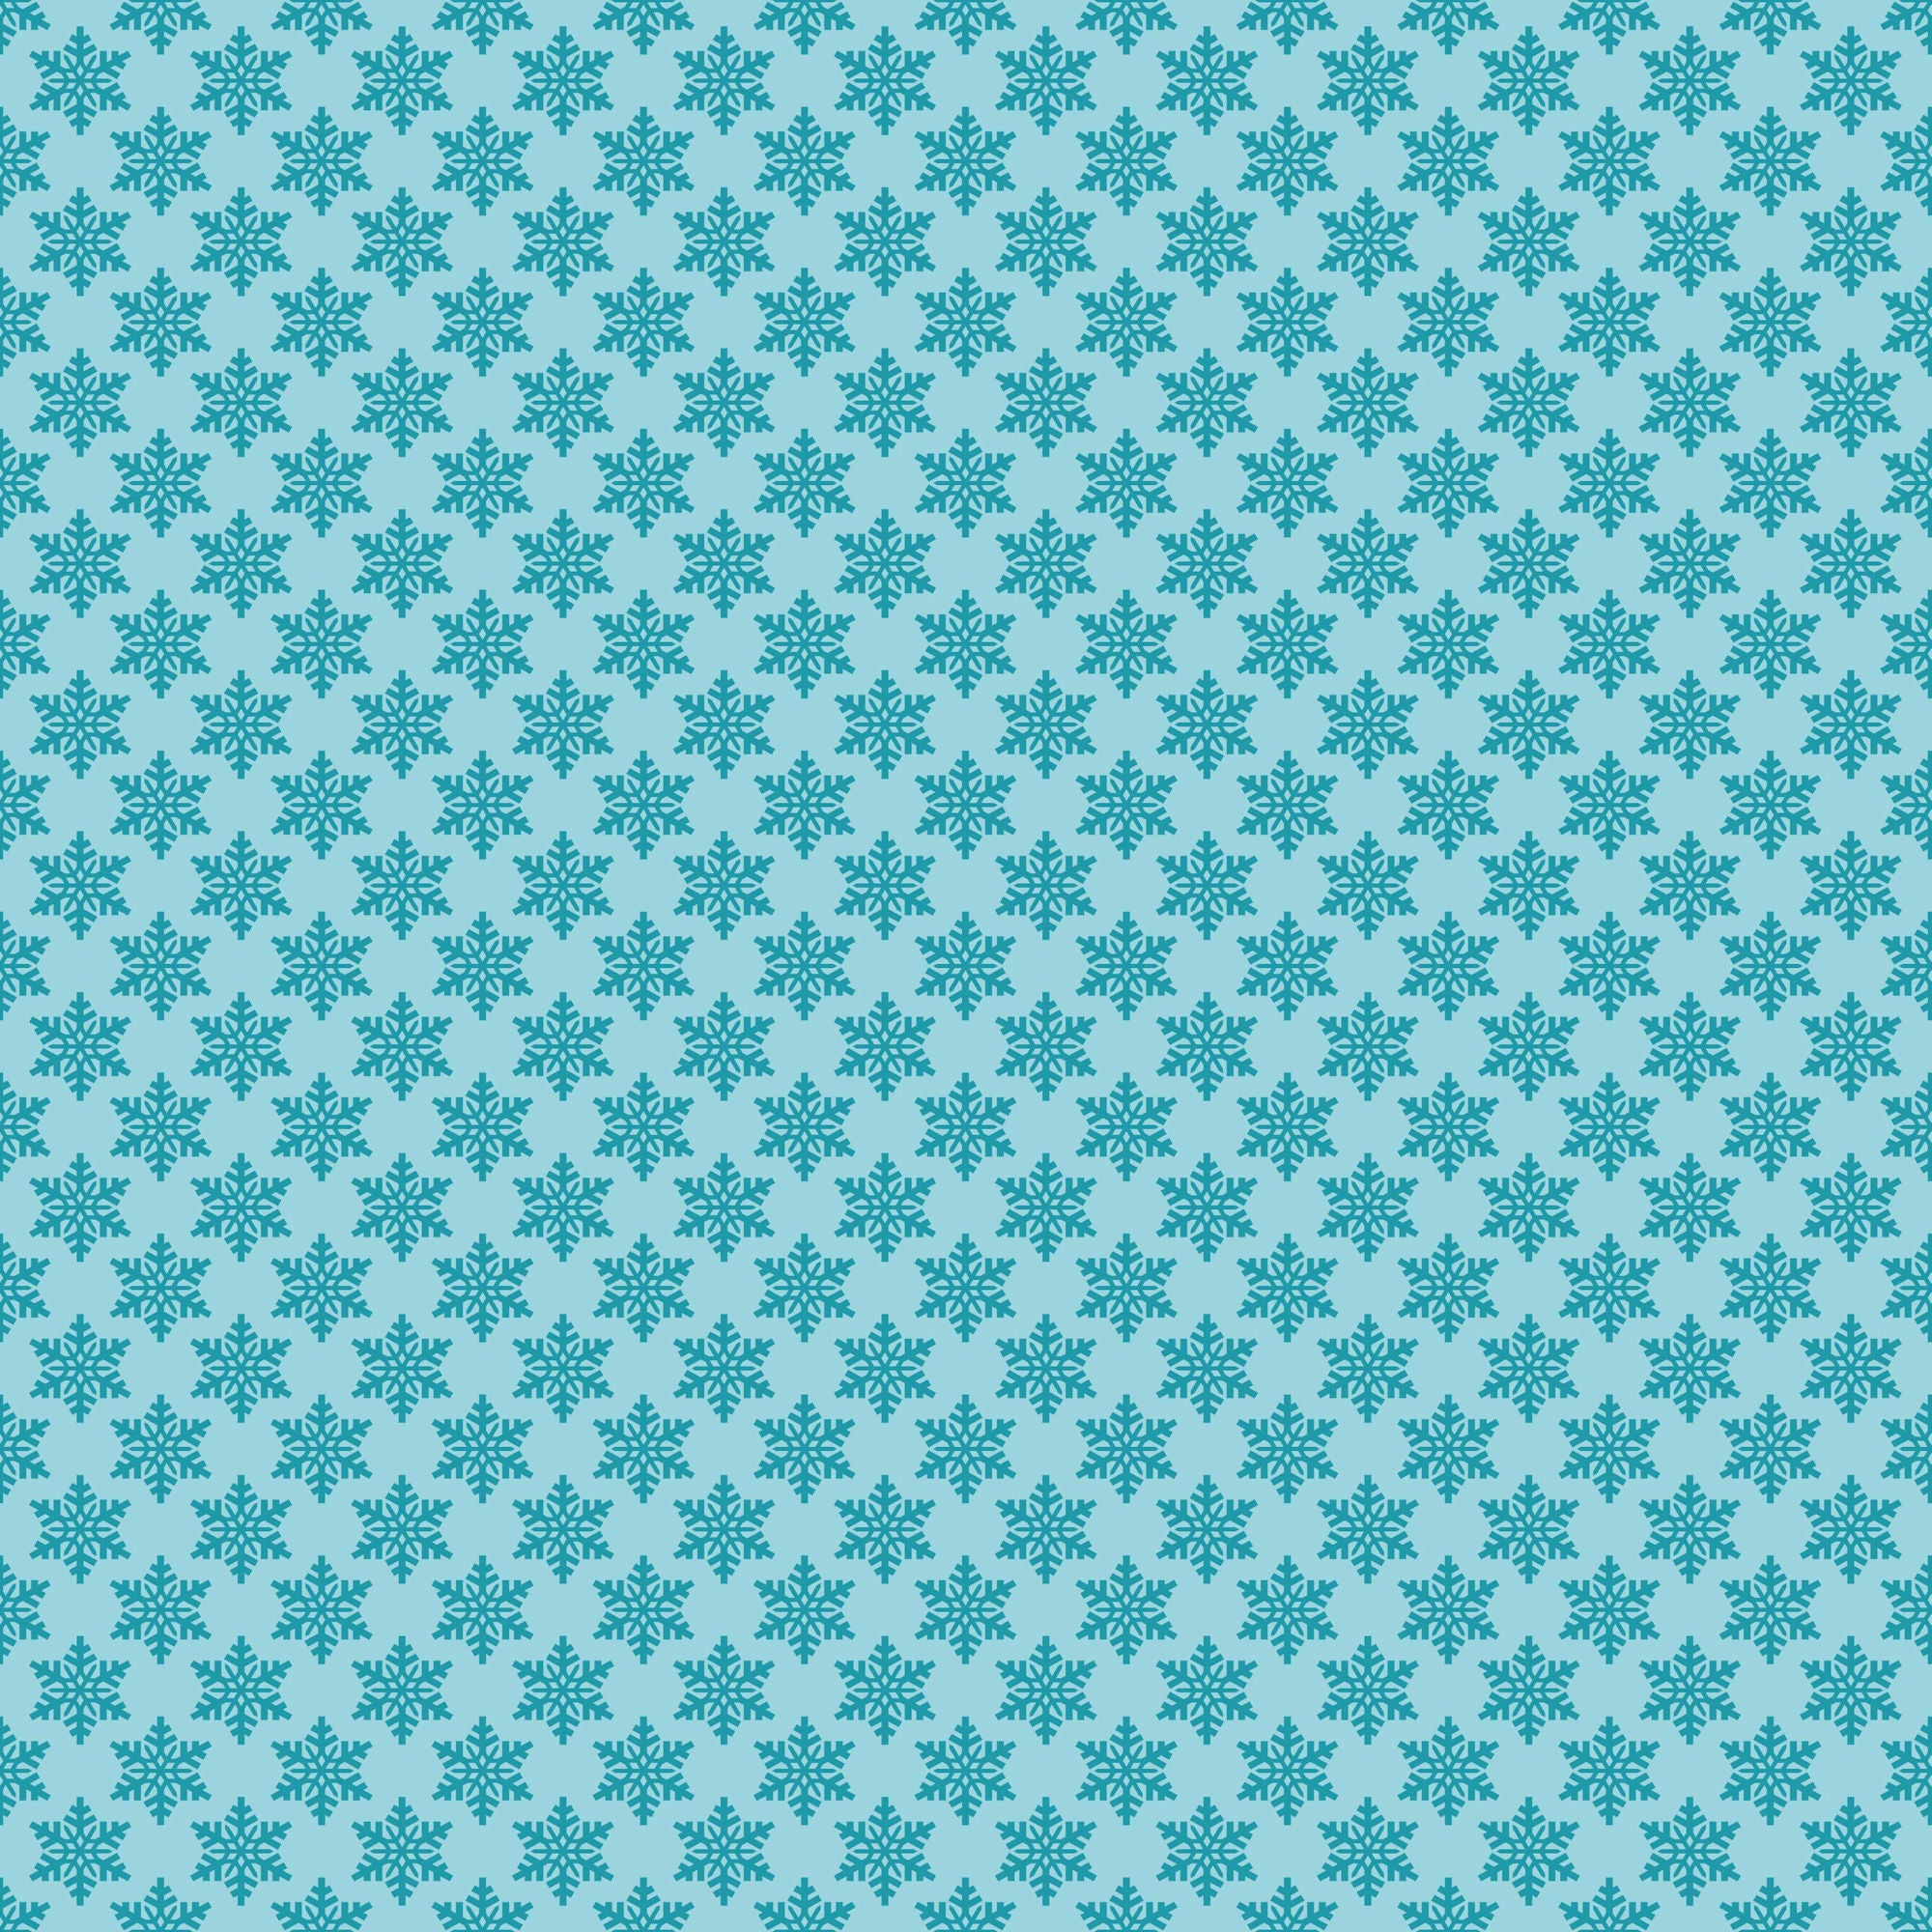 Inspired By Collection Snowflakes 12 x 12 Double-Sided Scrapbook Paper by SSC Designs